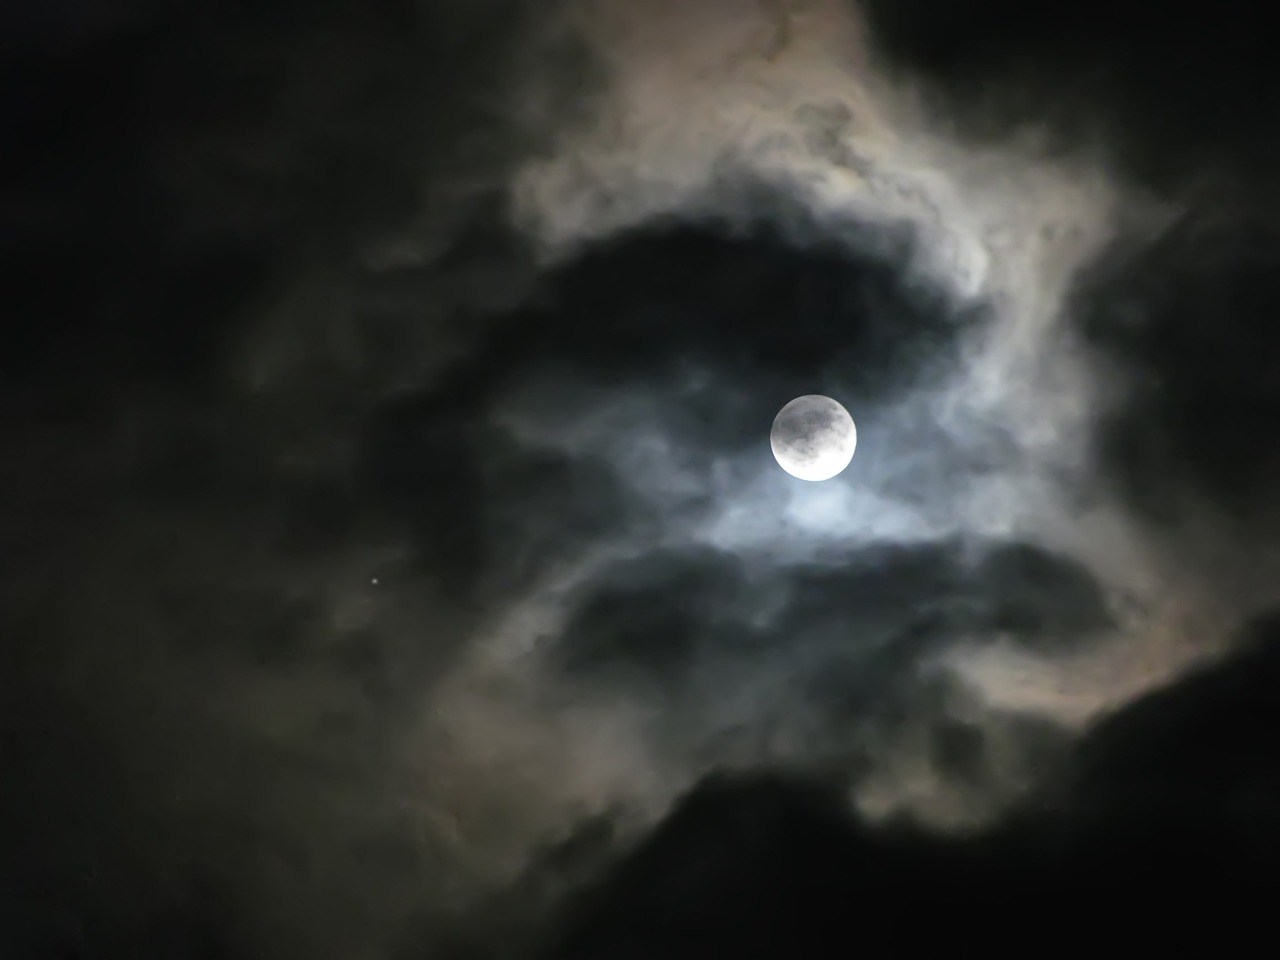 a full moon is seen through the clouds, a portrait, by Alexander Scott, flickr, dramatic nebula sky, night time footage